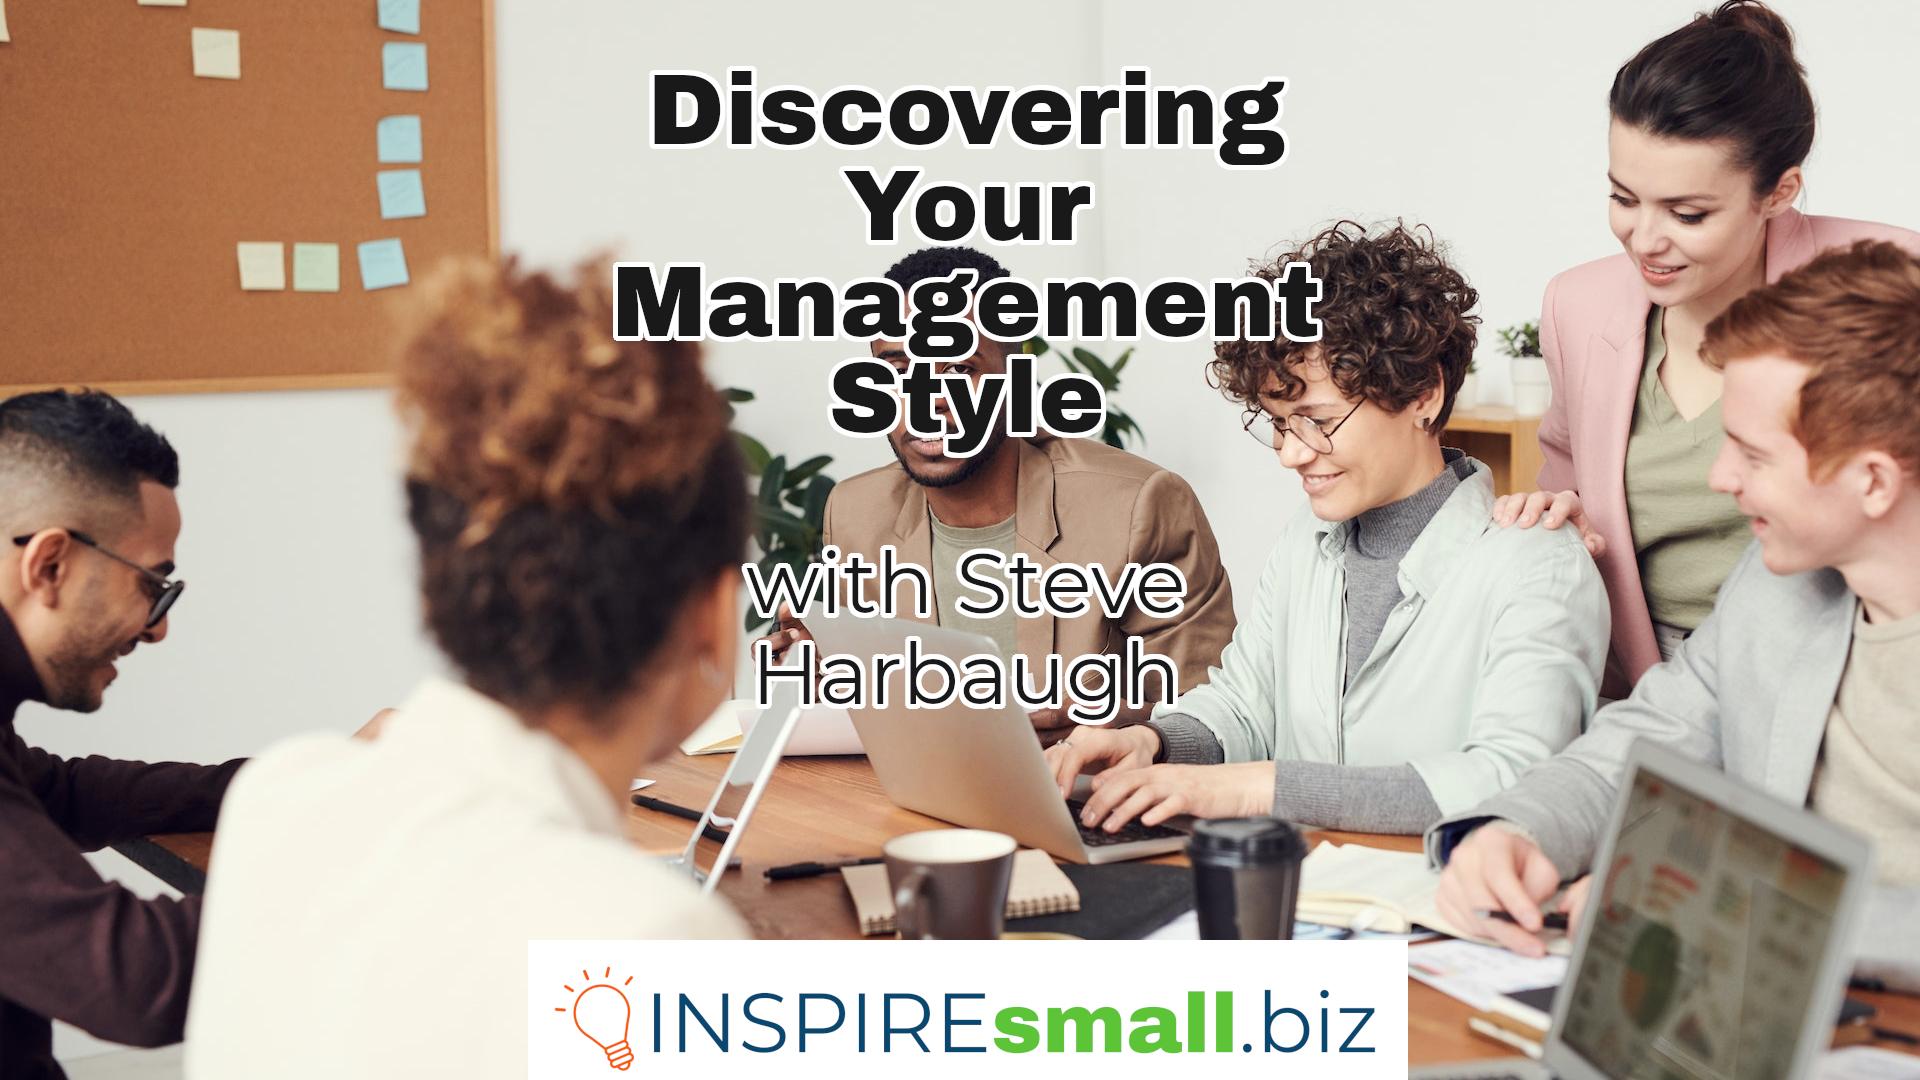 A table full of people having a meeting, with text Discovering Your Management Style with Steve Harbaugh, hosted by INSPIREsmall.biz